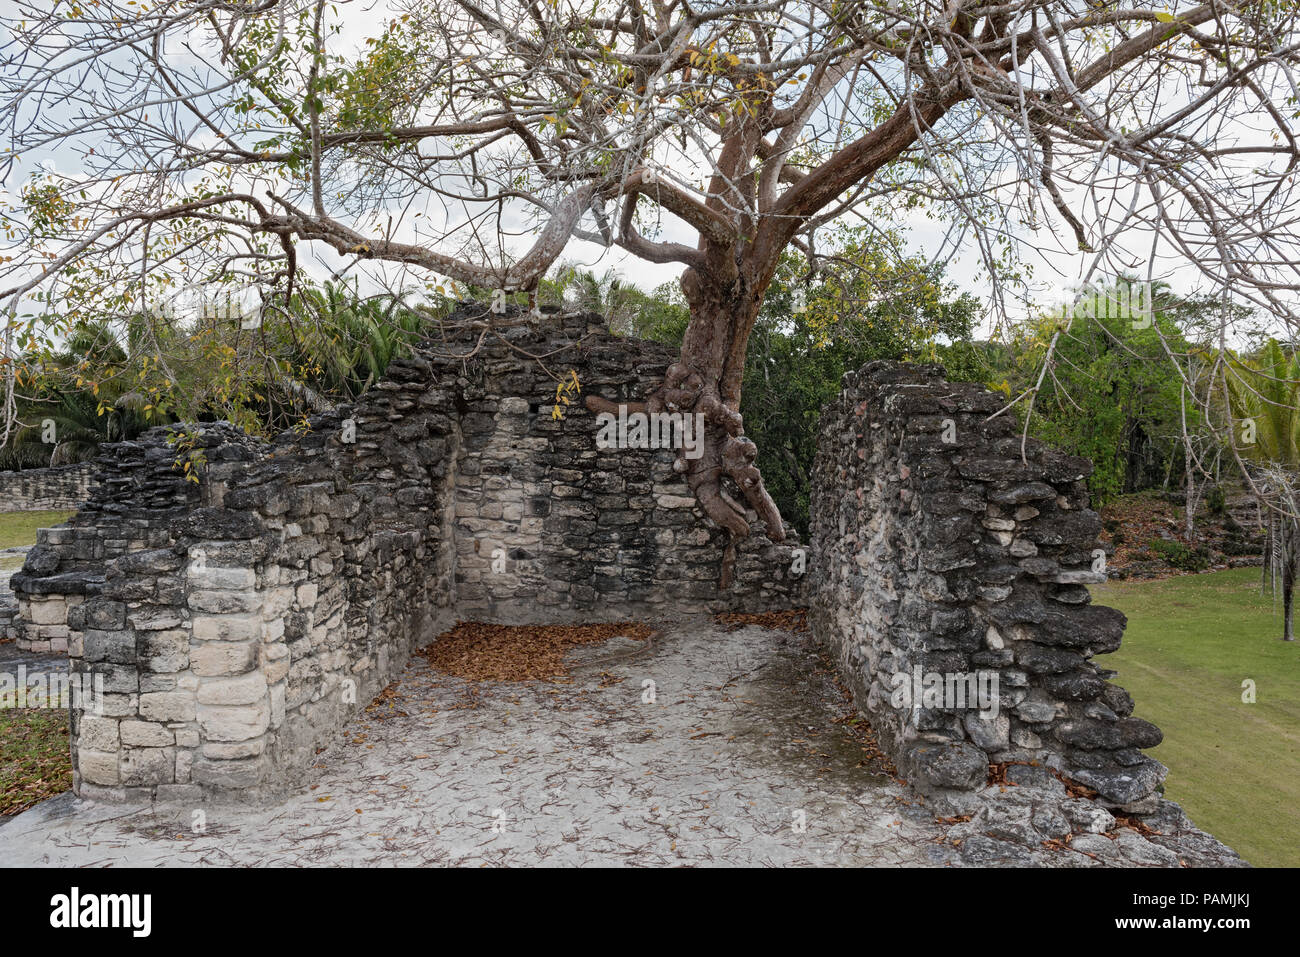 The ruins of the ancient Mayan city of Kohunlich, Quintana Roo, Mexico. Stock Photo